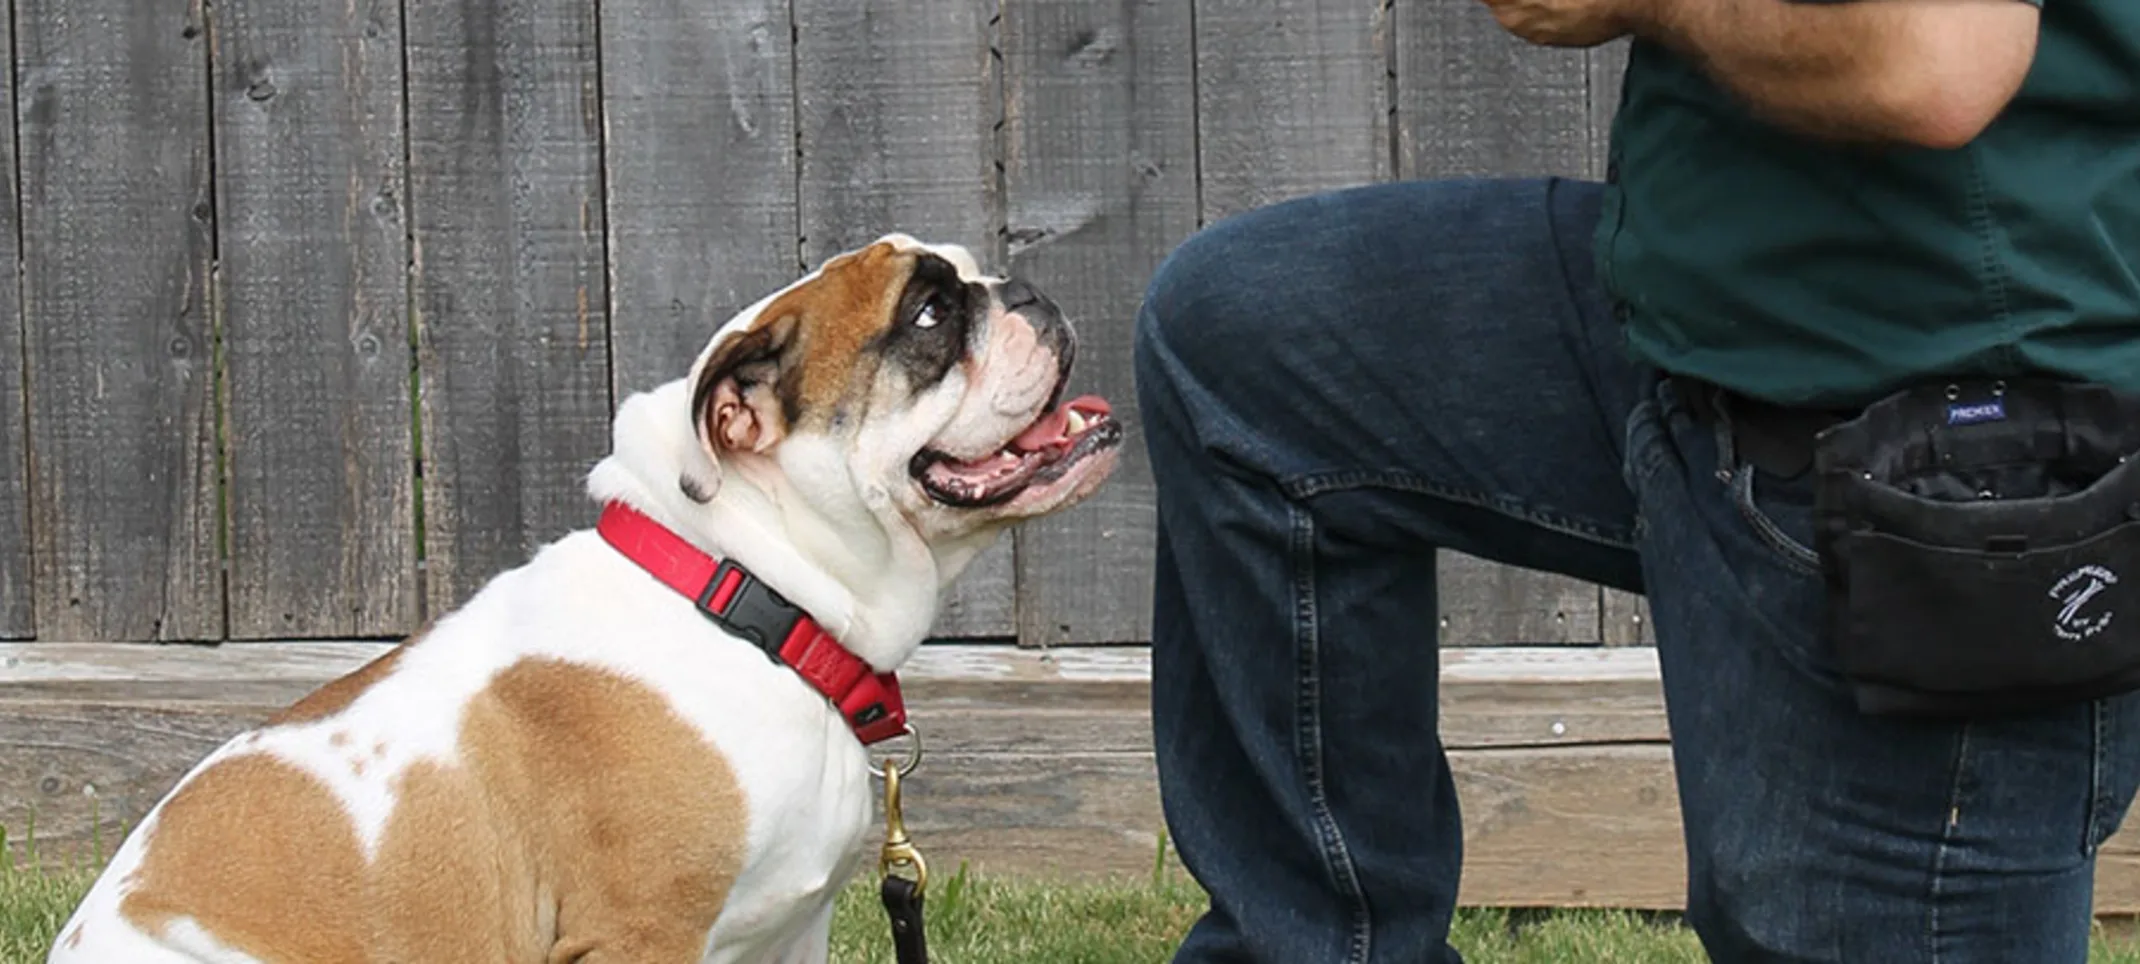 Trainer kneeling on ground with obedient bulldog